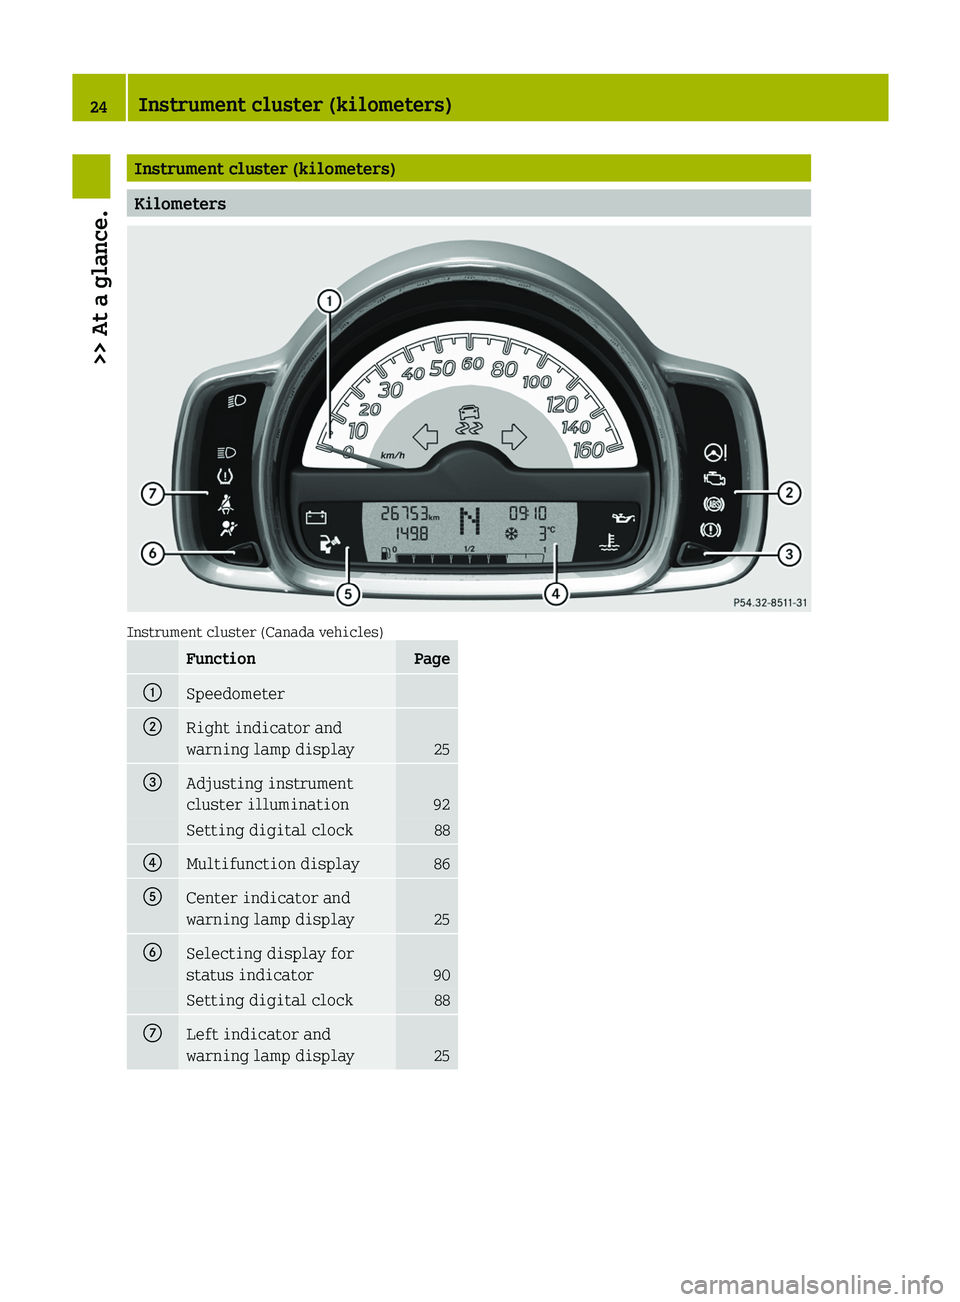 SMART FORTWO COUPE 2012  Owners Manual Instrument cluster (kilometers)
Kilometers
Instrument cluster (Canada vehicles)
Function Page
:
Speedometer
;
Right indicator and
warning lamp display
25
=
Adjusting instrument
cluster illumination
92